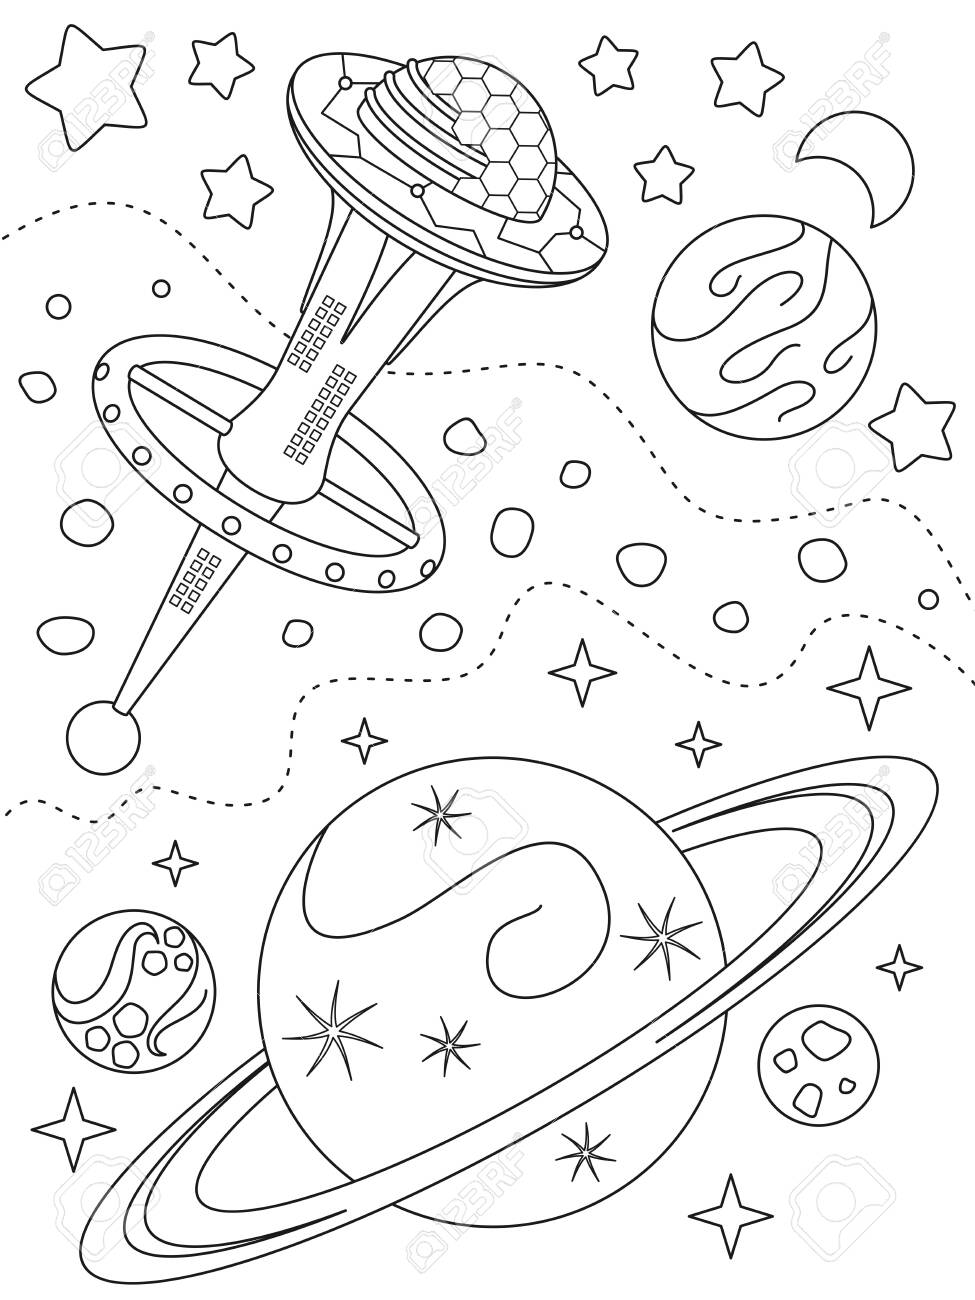 Coloring page with space station different planets nebulae and stars black elements on a white background outer space fantasy vector design template for kids coloring book print and poster royalty free svg